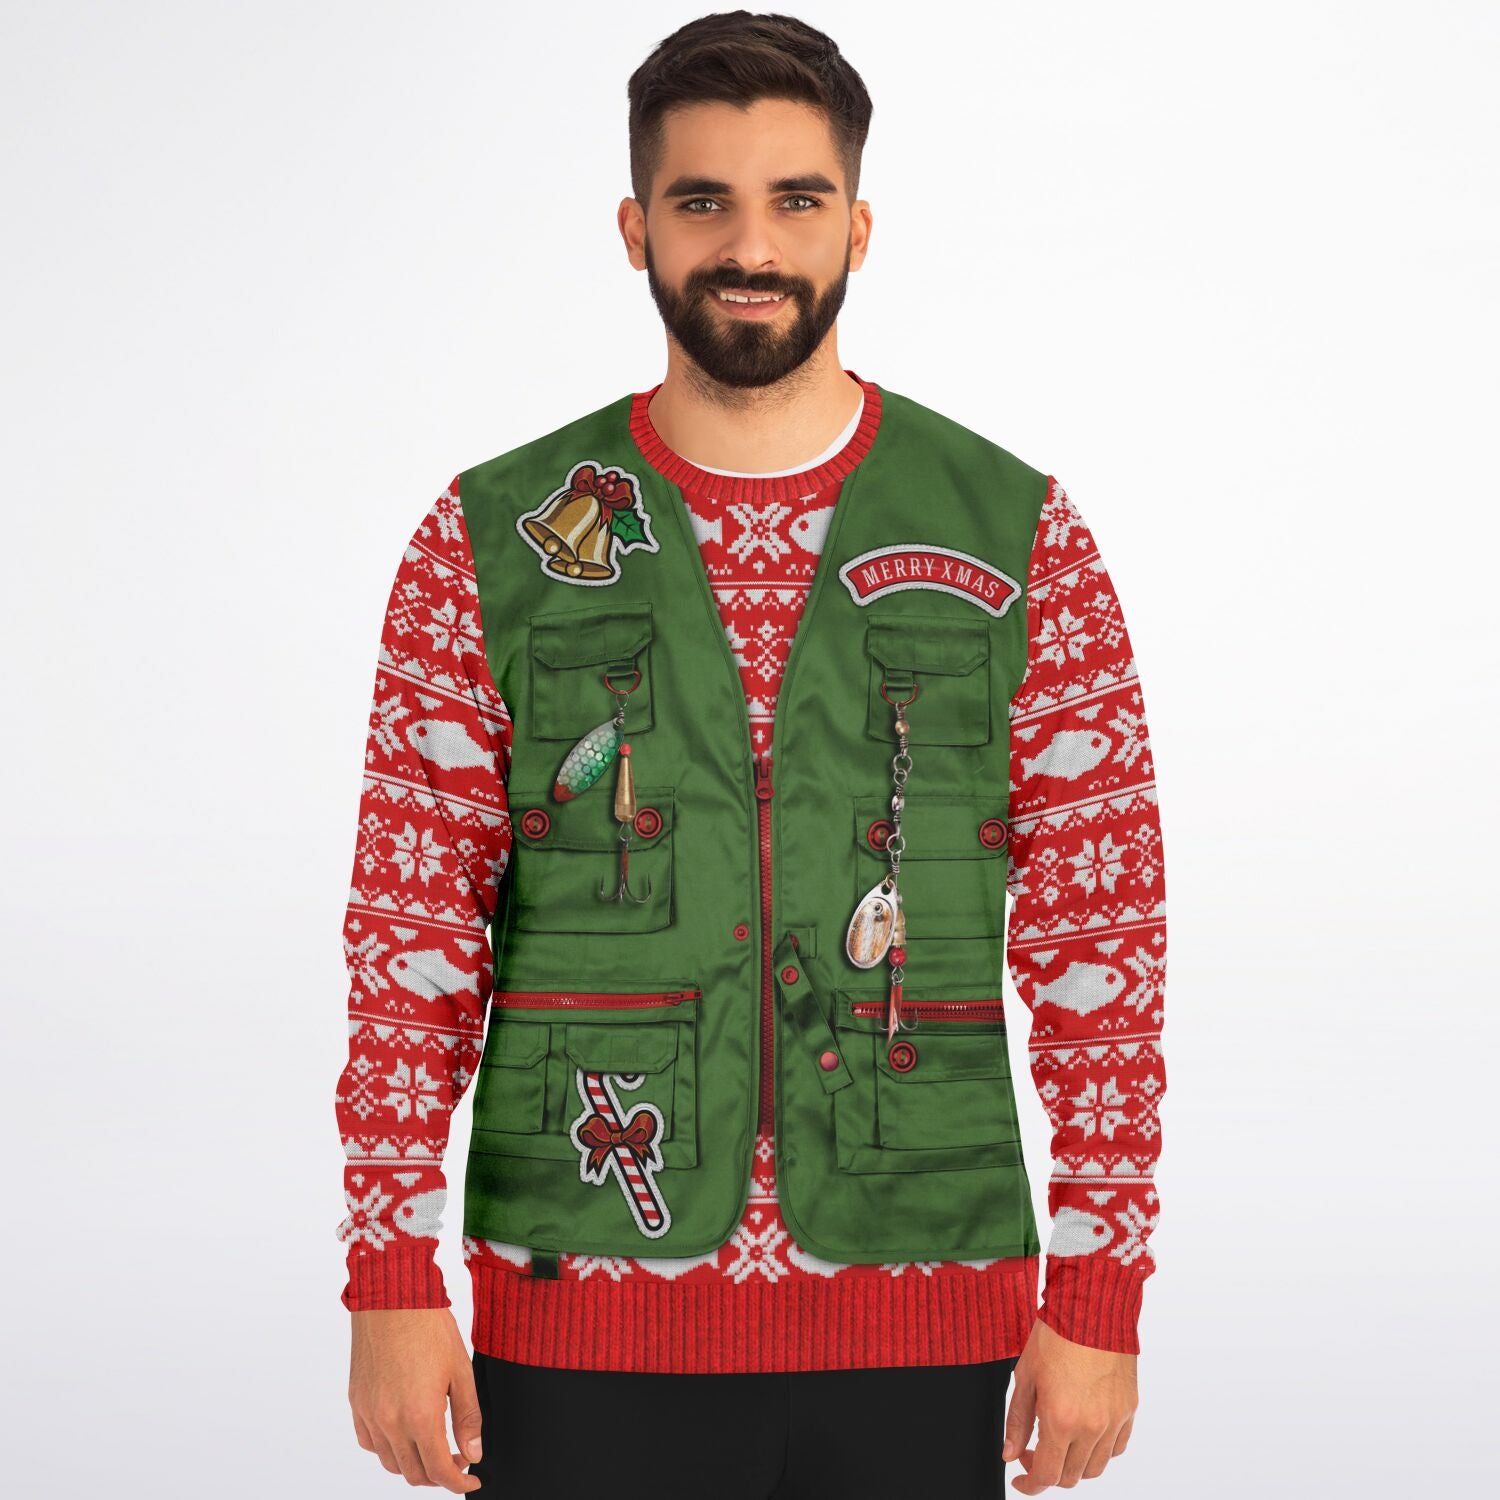 Merry Fishmas Ugly Sweater - Sport Finesse